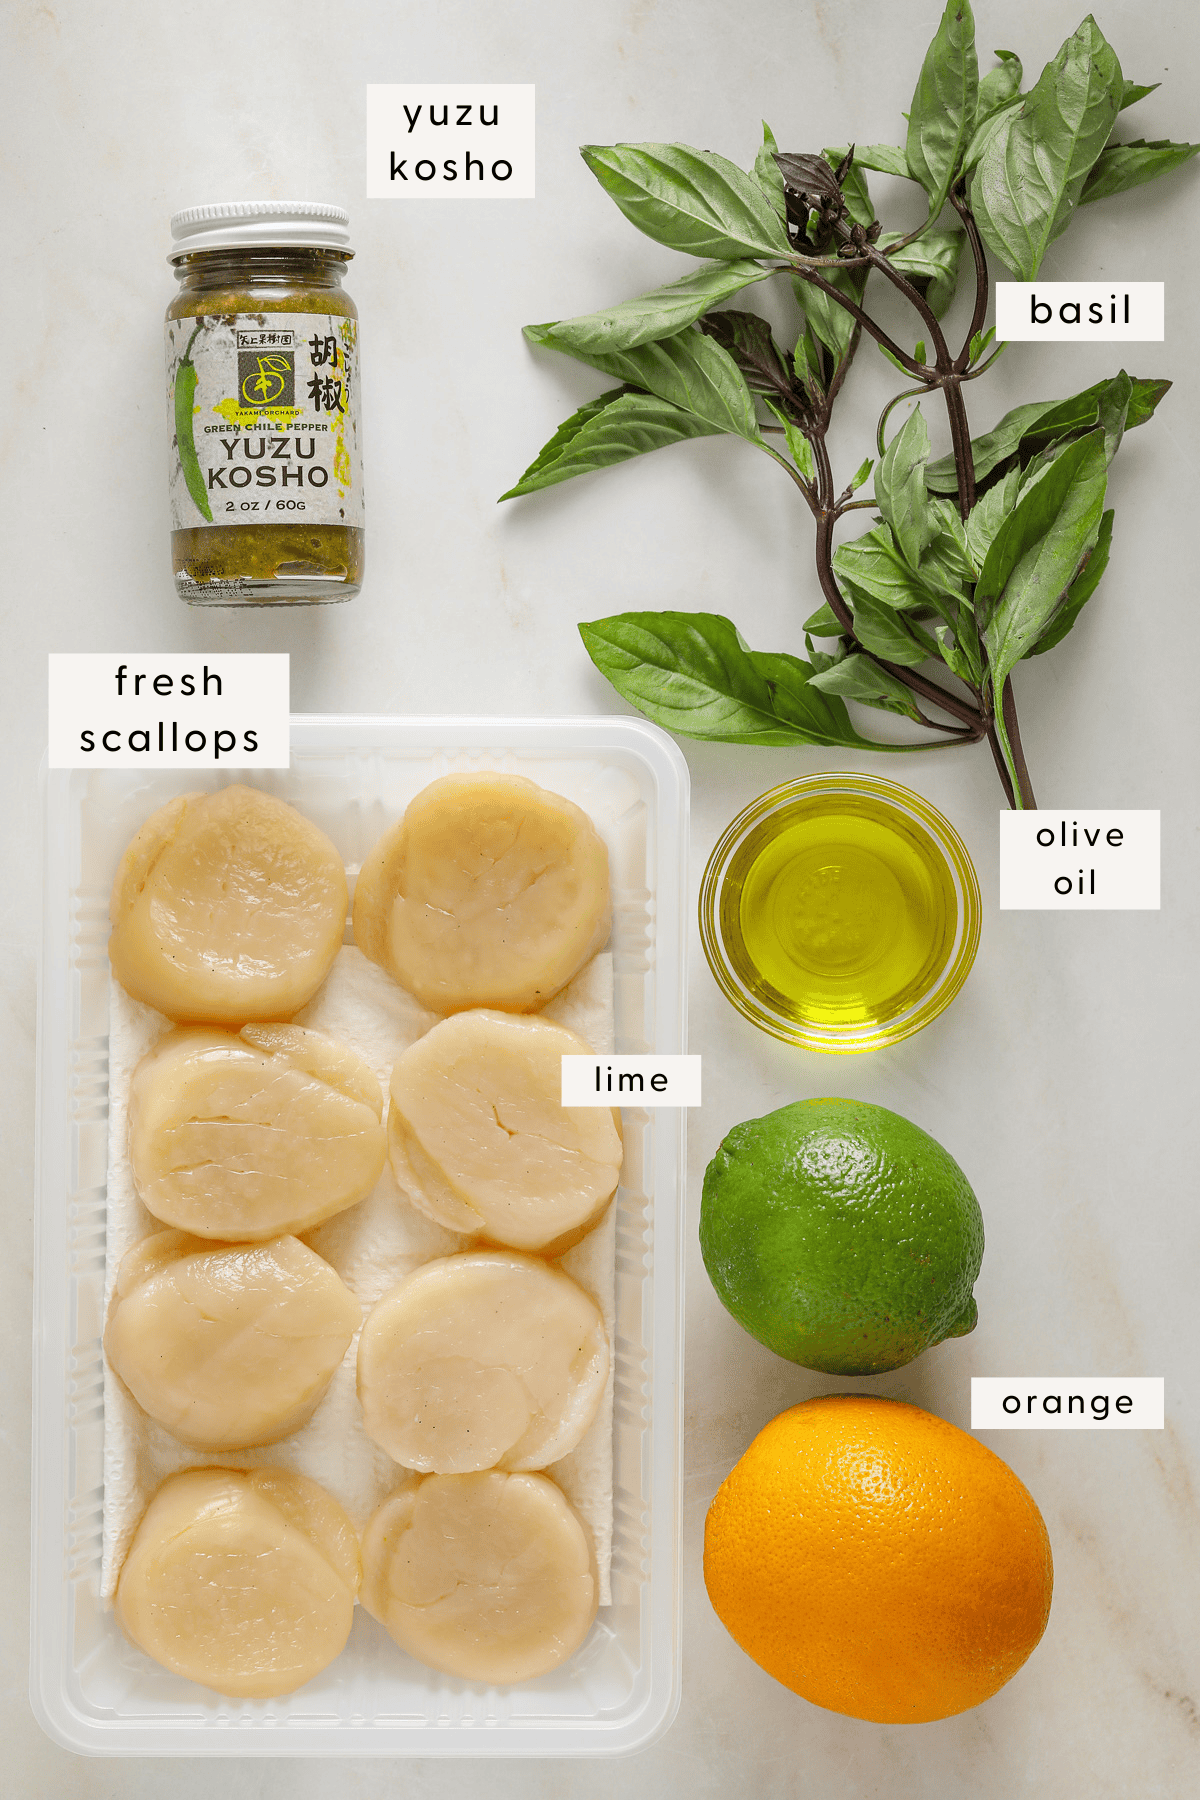 Fresh scallops in a plastic container, basil leaves, a bottle of yuzu kosho, olive oil in a glass dish and citrus on a marble tabletop.